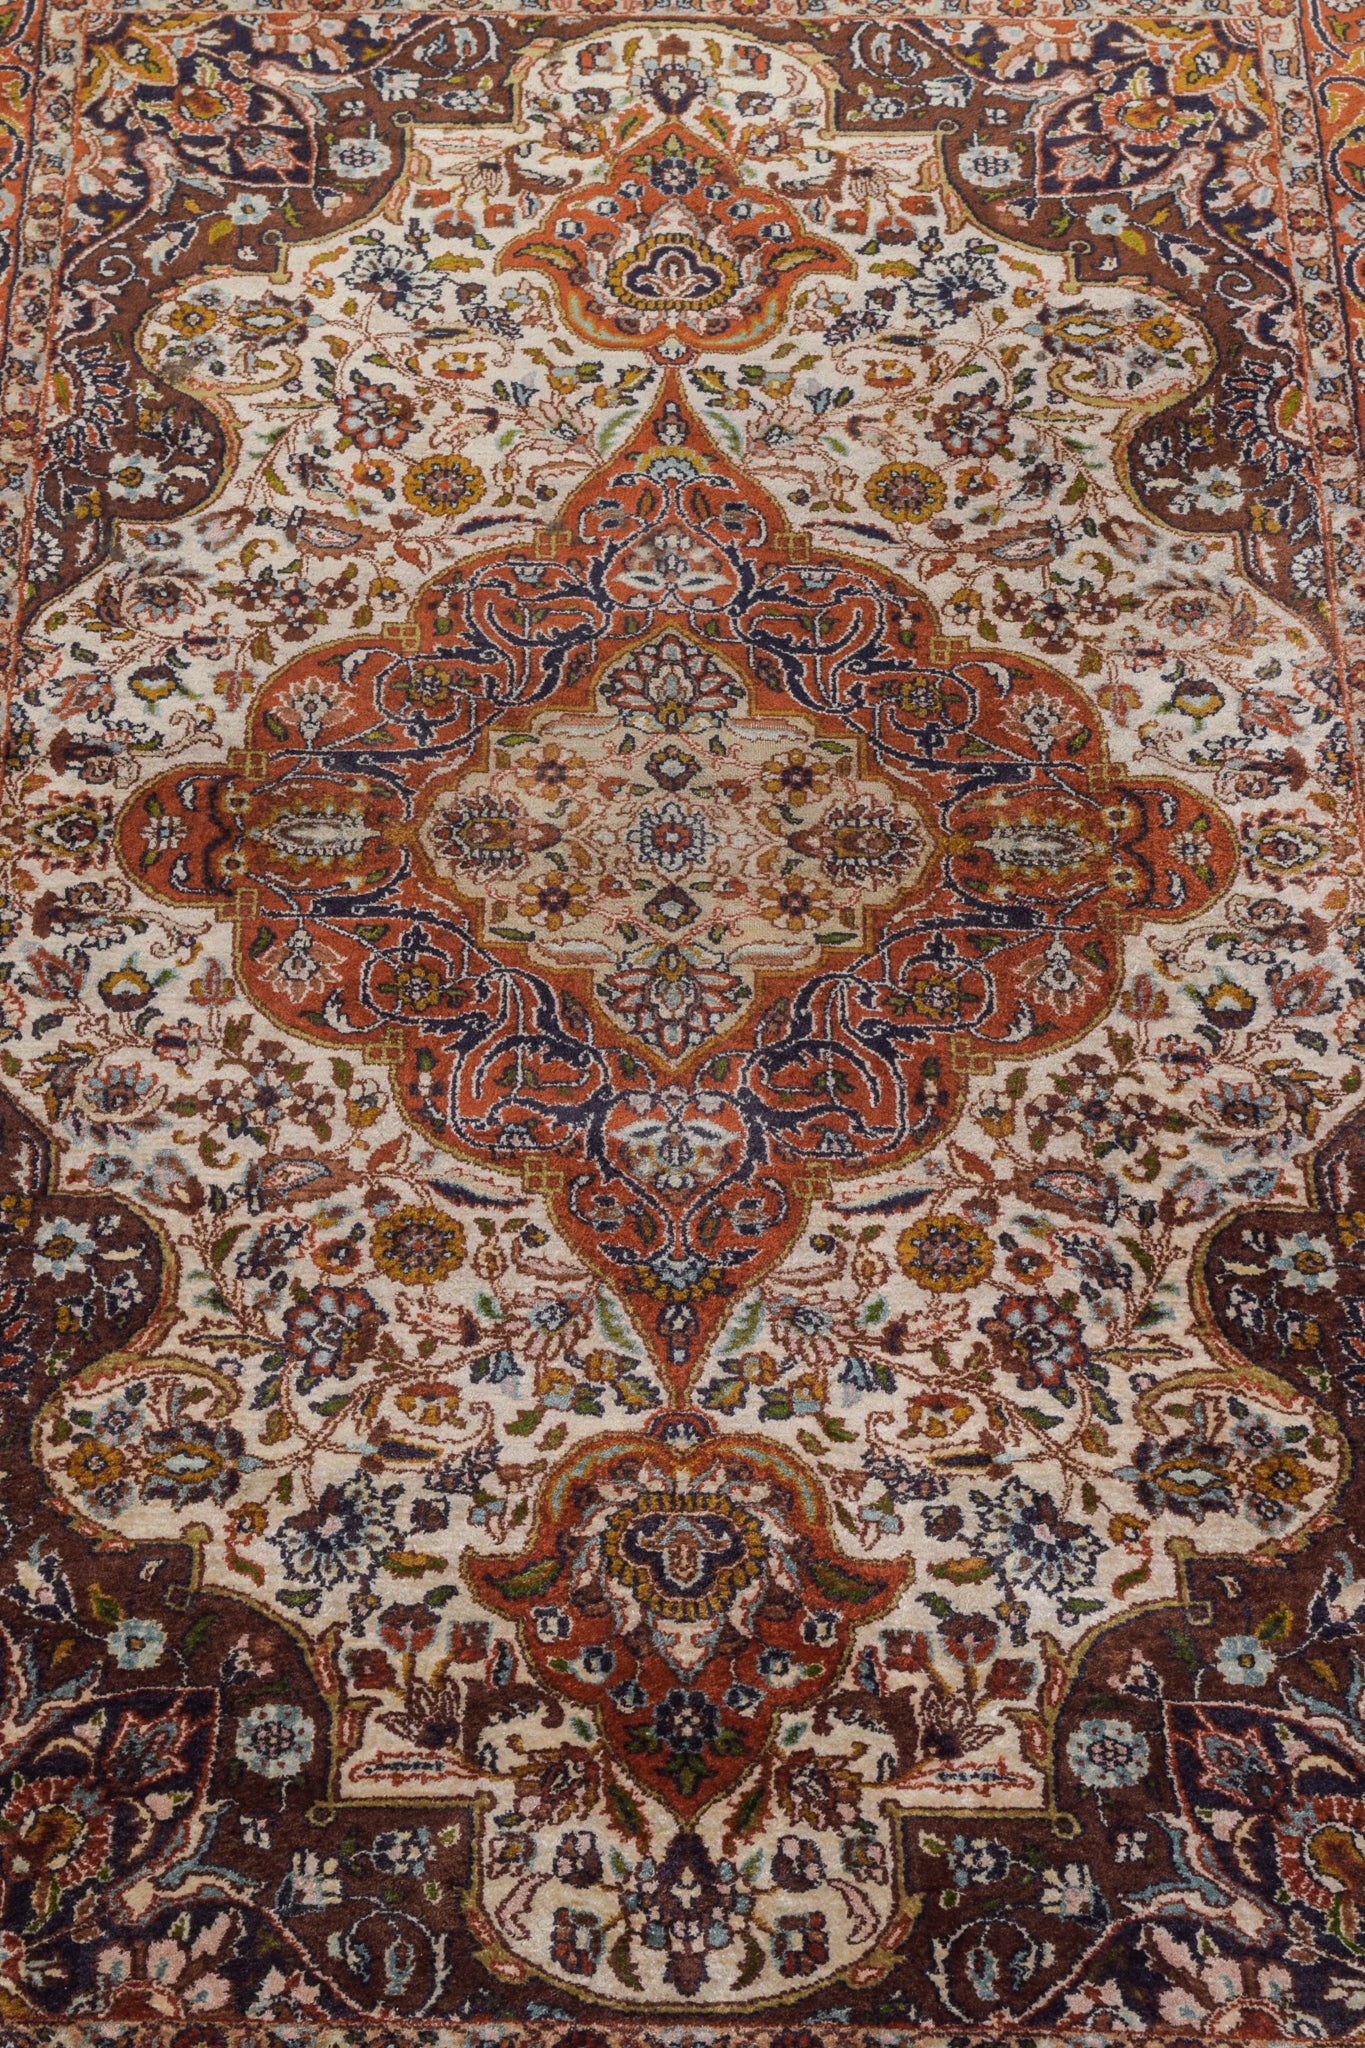 Handwoven Medallion Rug With Flowers